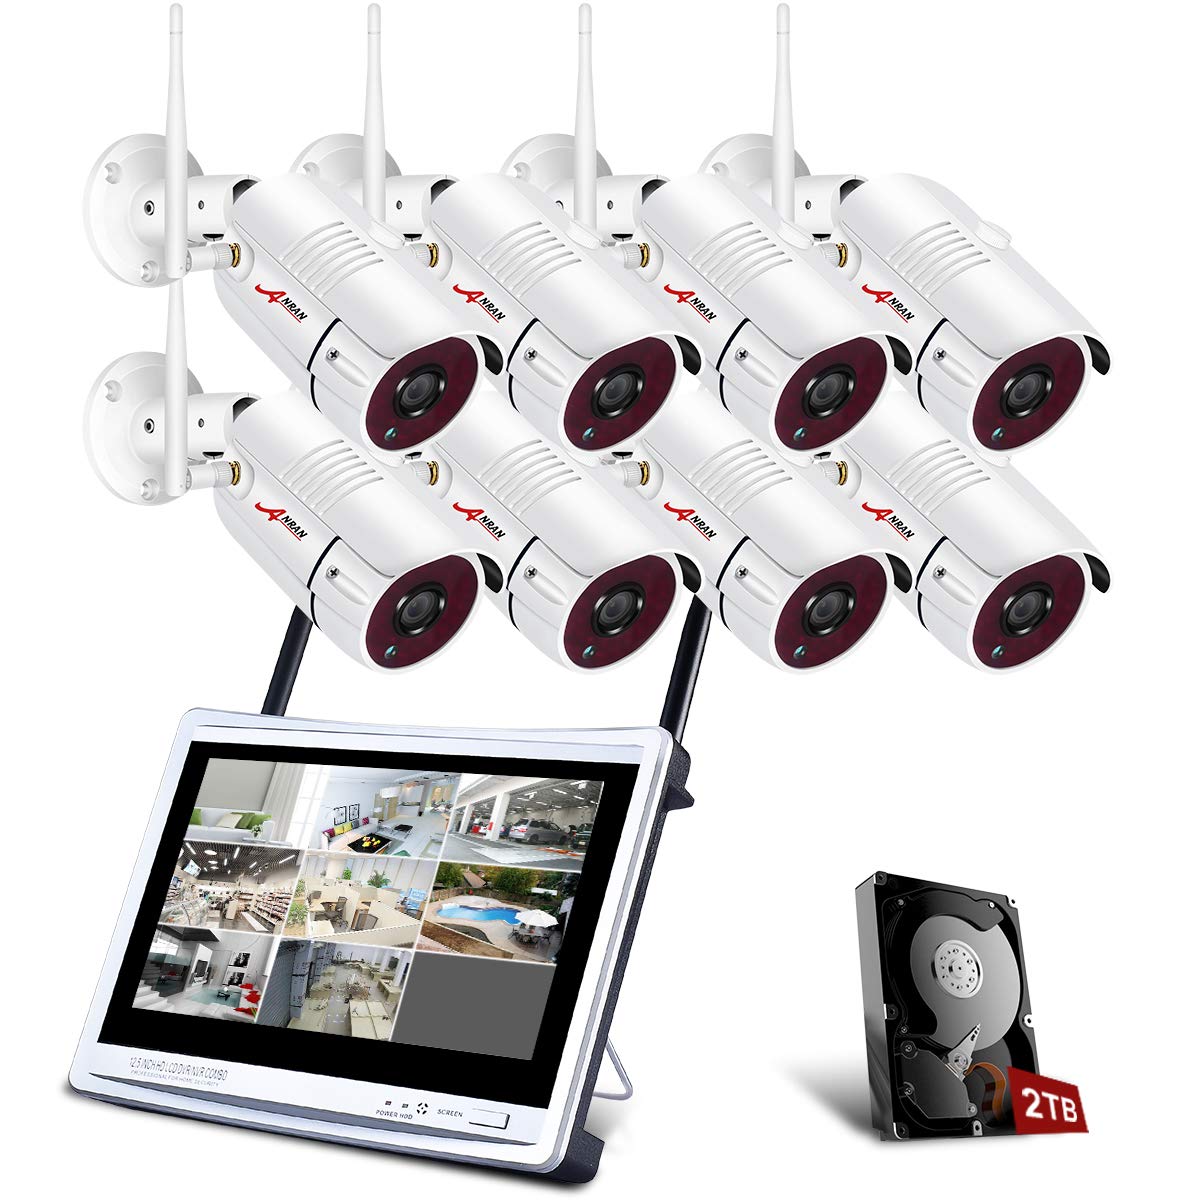 All-in-1 Wireless Security Cameras System with 12